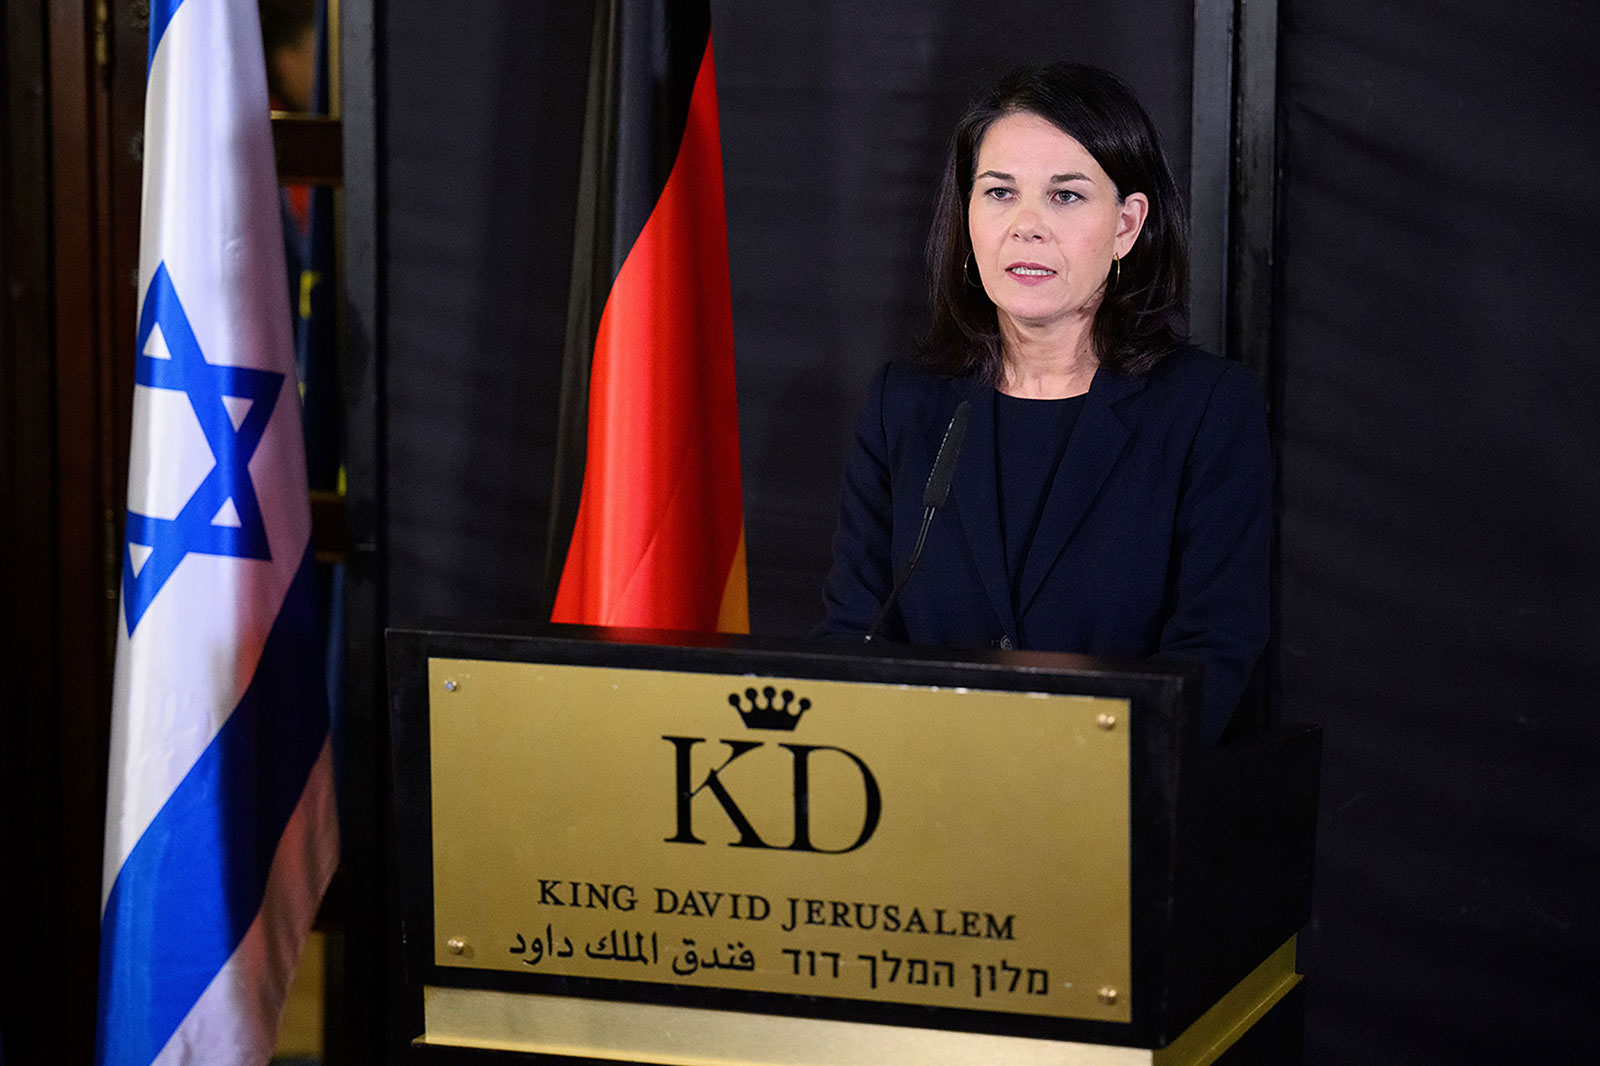 German Foreign Minister Annalena Baerbock speaks during a press conference at the King David Hotel in Jerusalem, about the situation in Israel on Wednesday, February 14. 